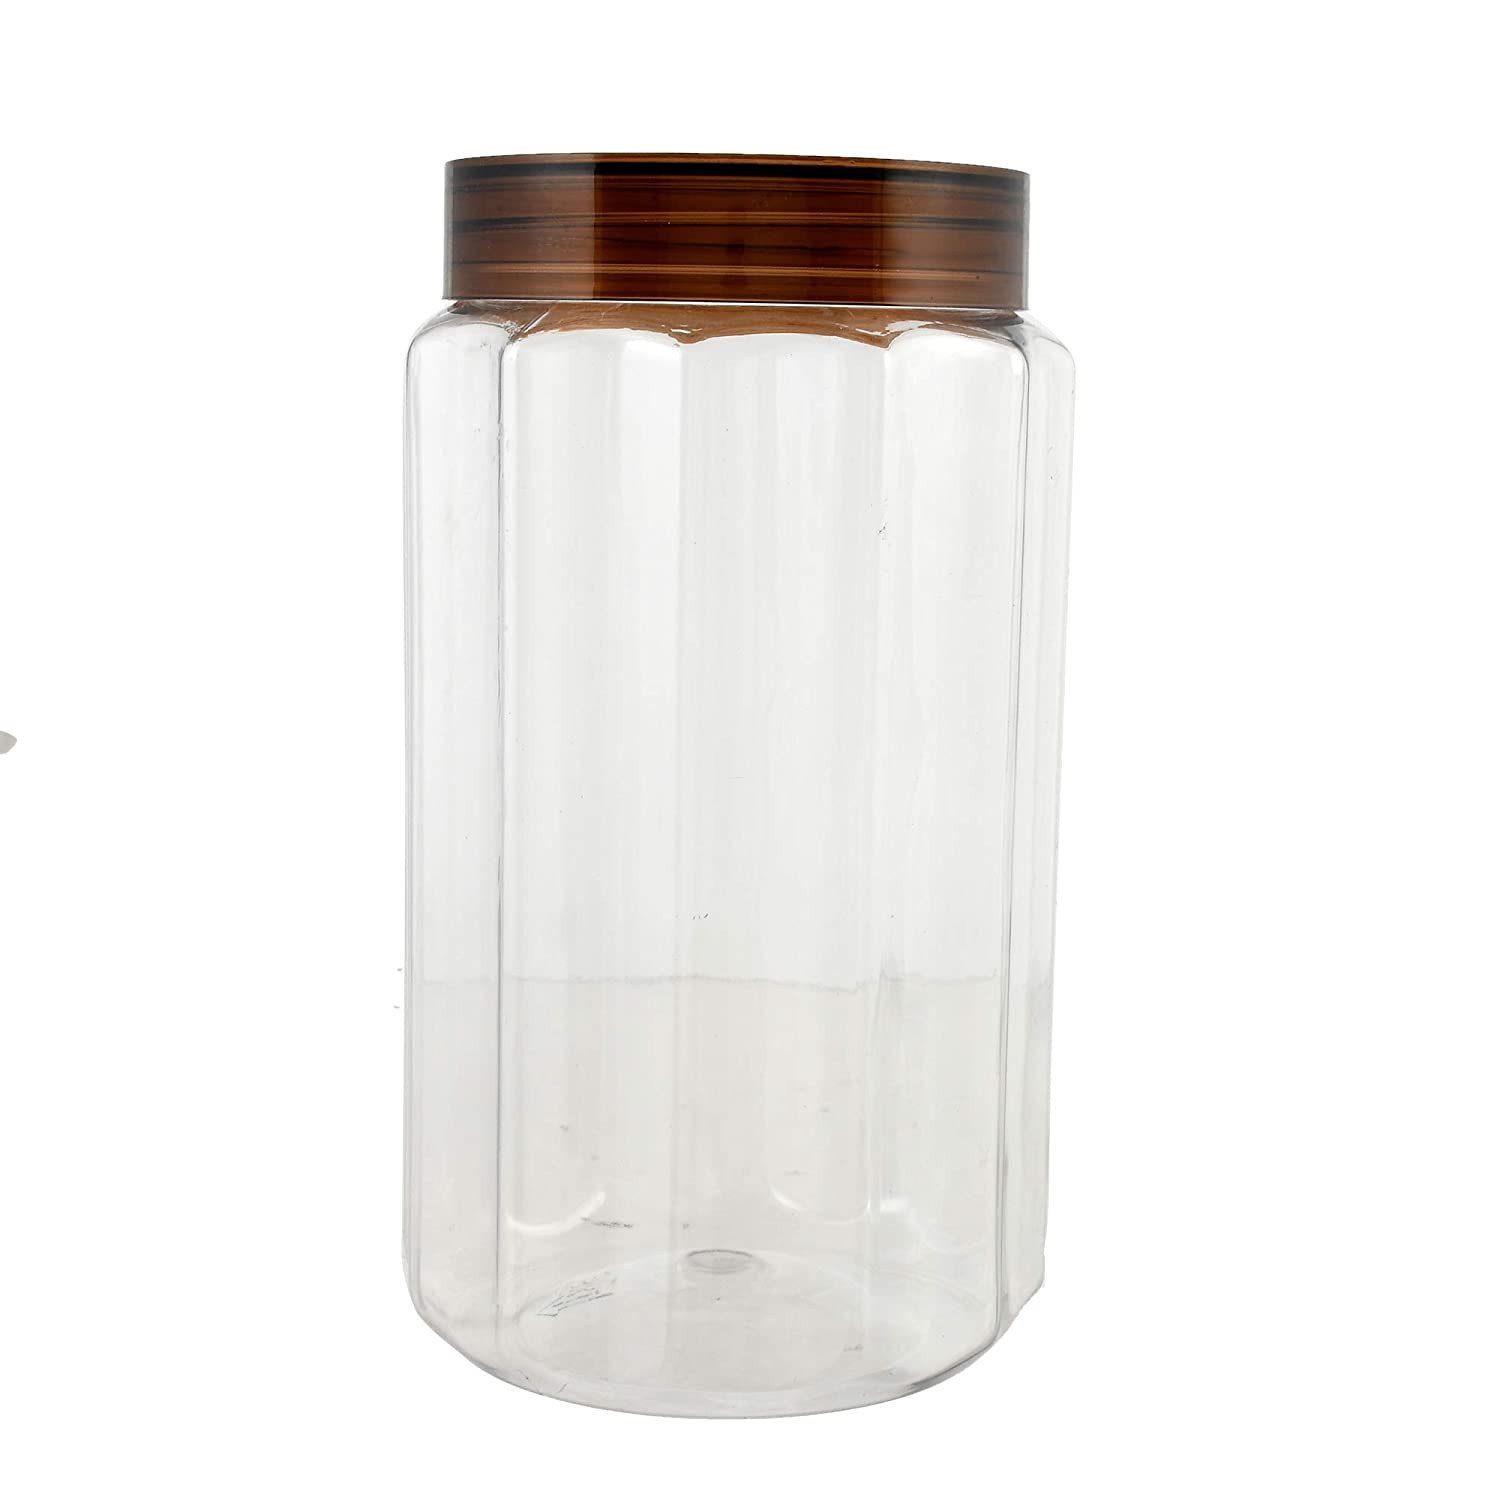 Kuber Industries Multipurpose Transparent Plastic Container With Airtight Lid,1800ml,(Brown)-HS42KUBMART25073